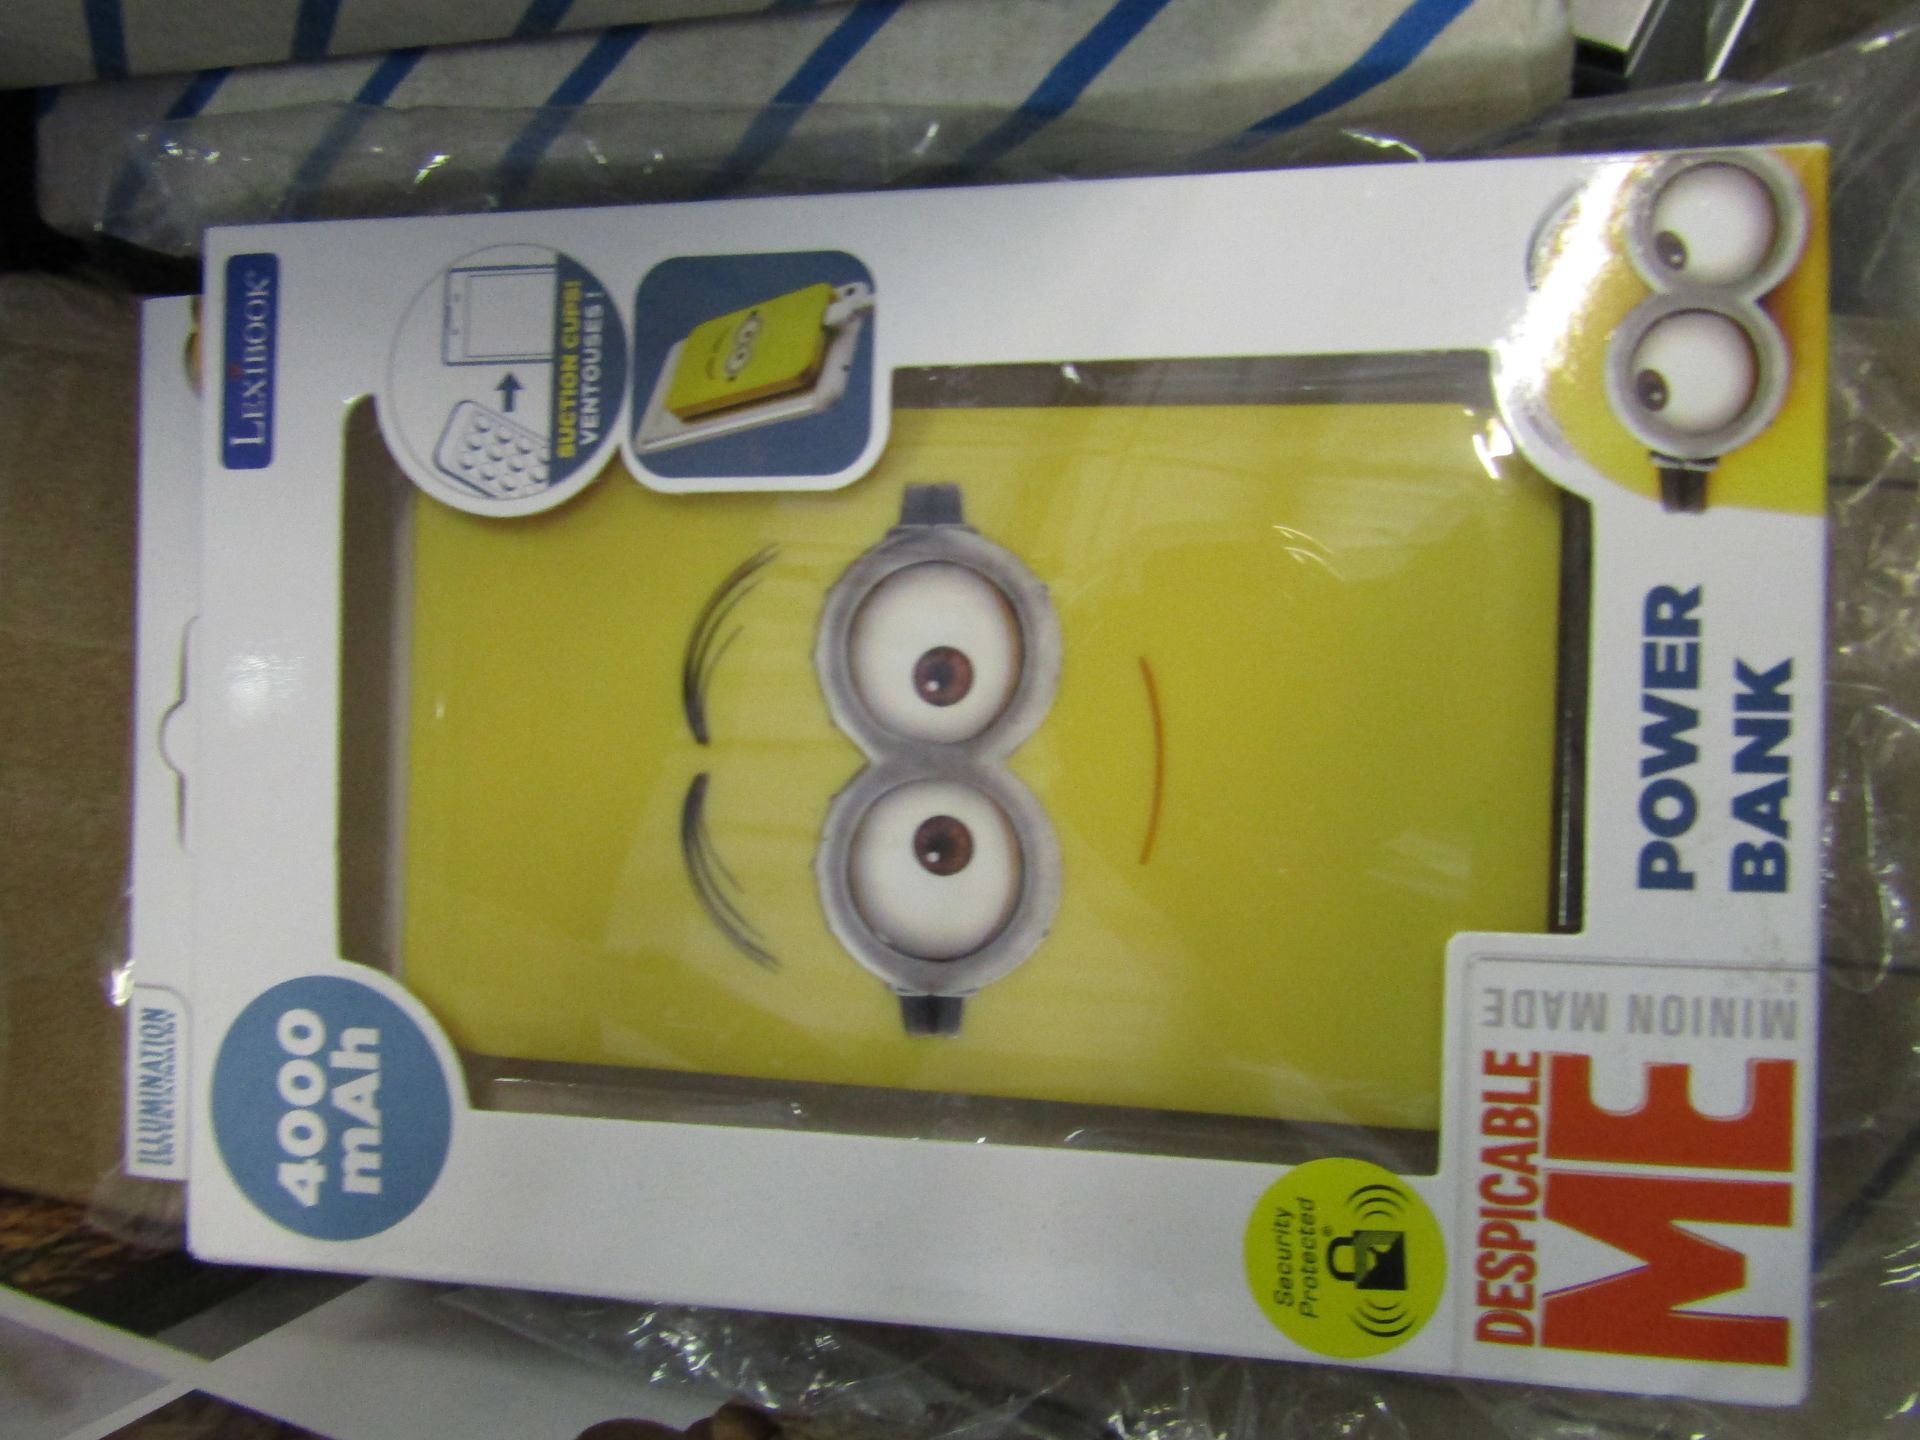 6x Minion portable power banks, all new and packaged.